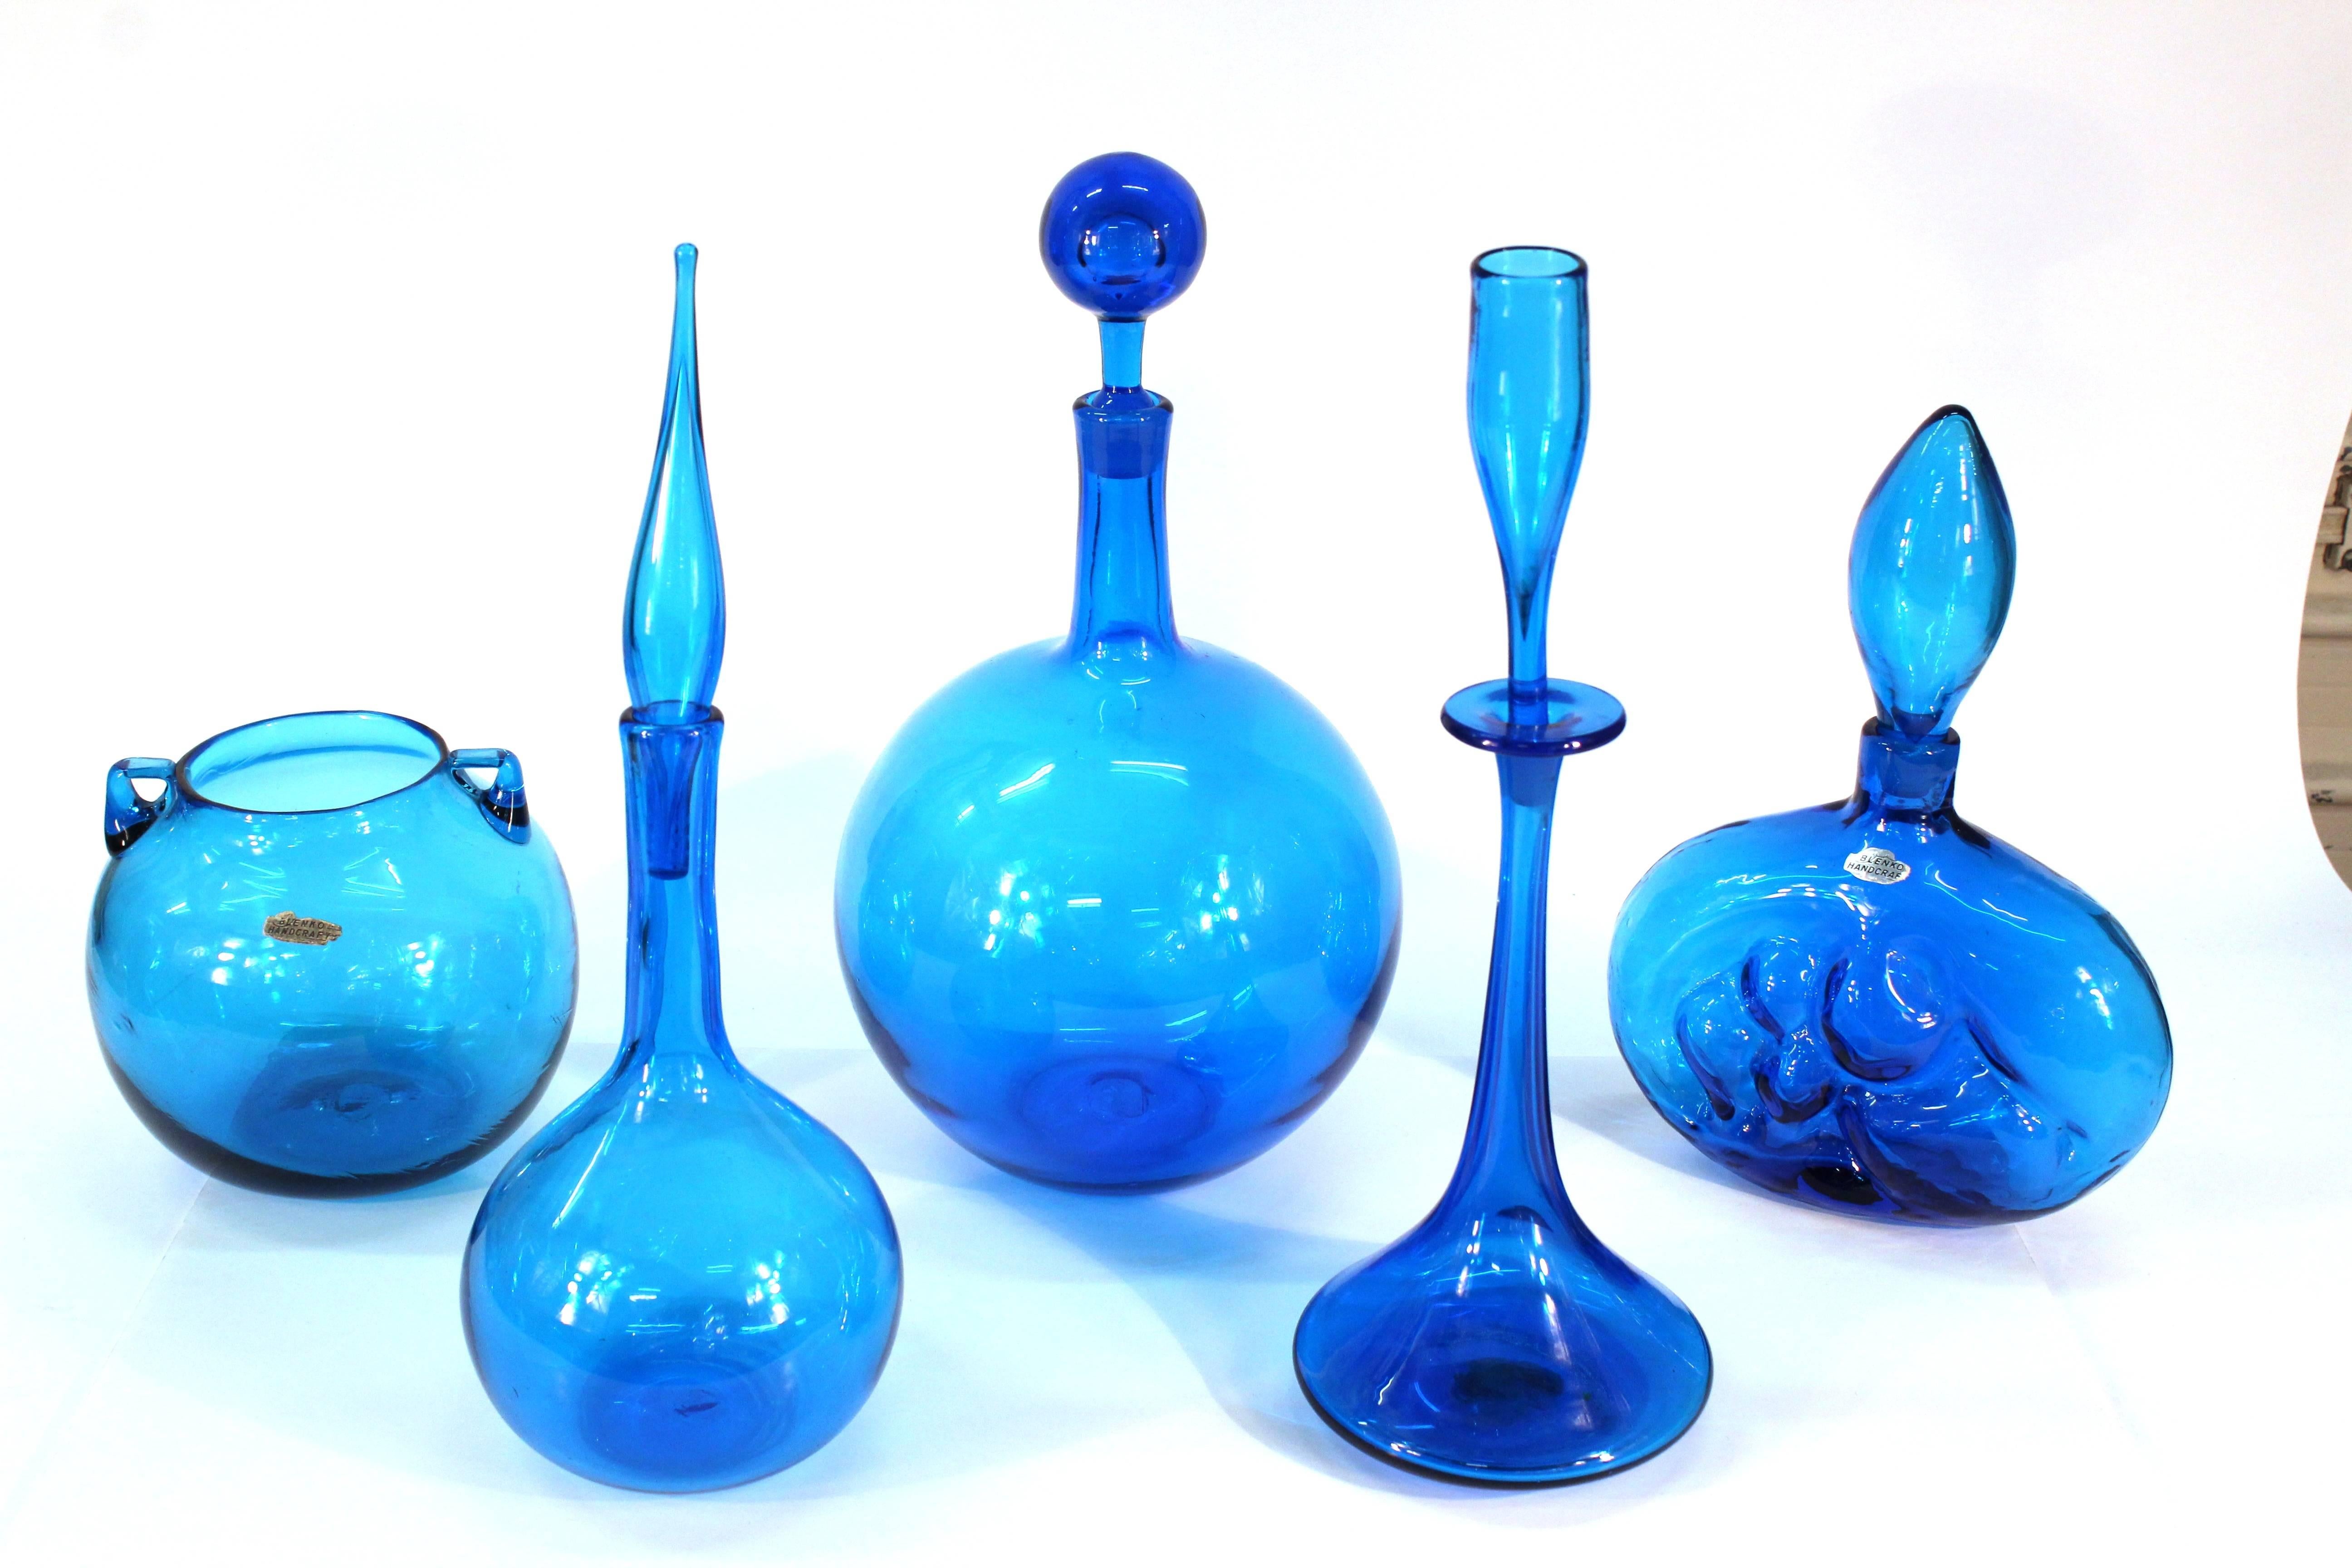 A group of five blown glass pieces by Blenko. Produced in Milton, West Virginia by Wayne Husted and Joel Myer. Available as a collection or individually, all pieces are uniquely numbered.

#16-08-02: Shot glass decanter with sticker, Turquoise